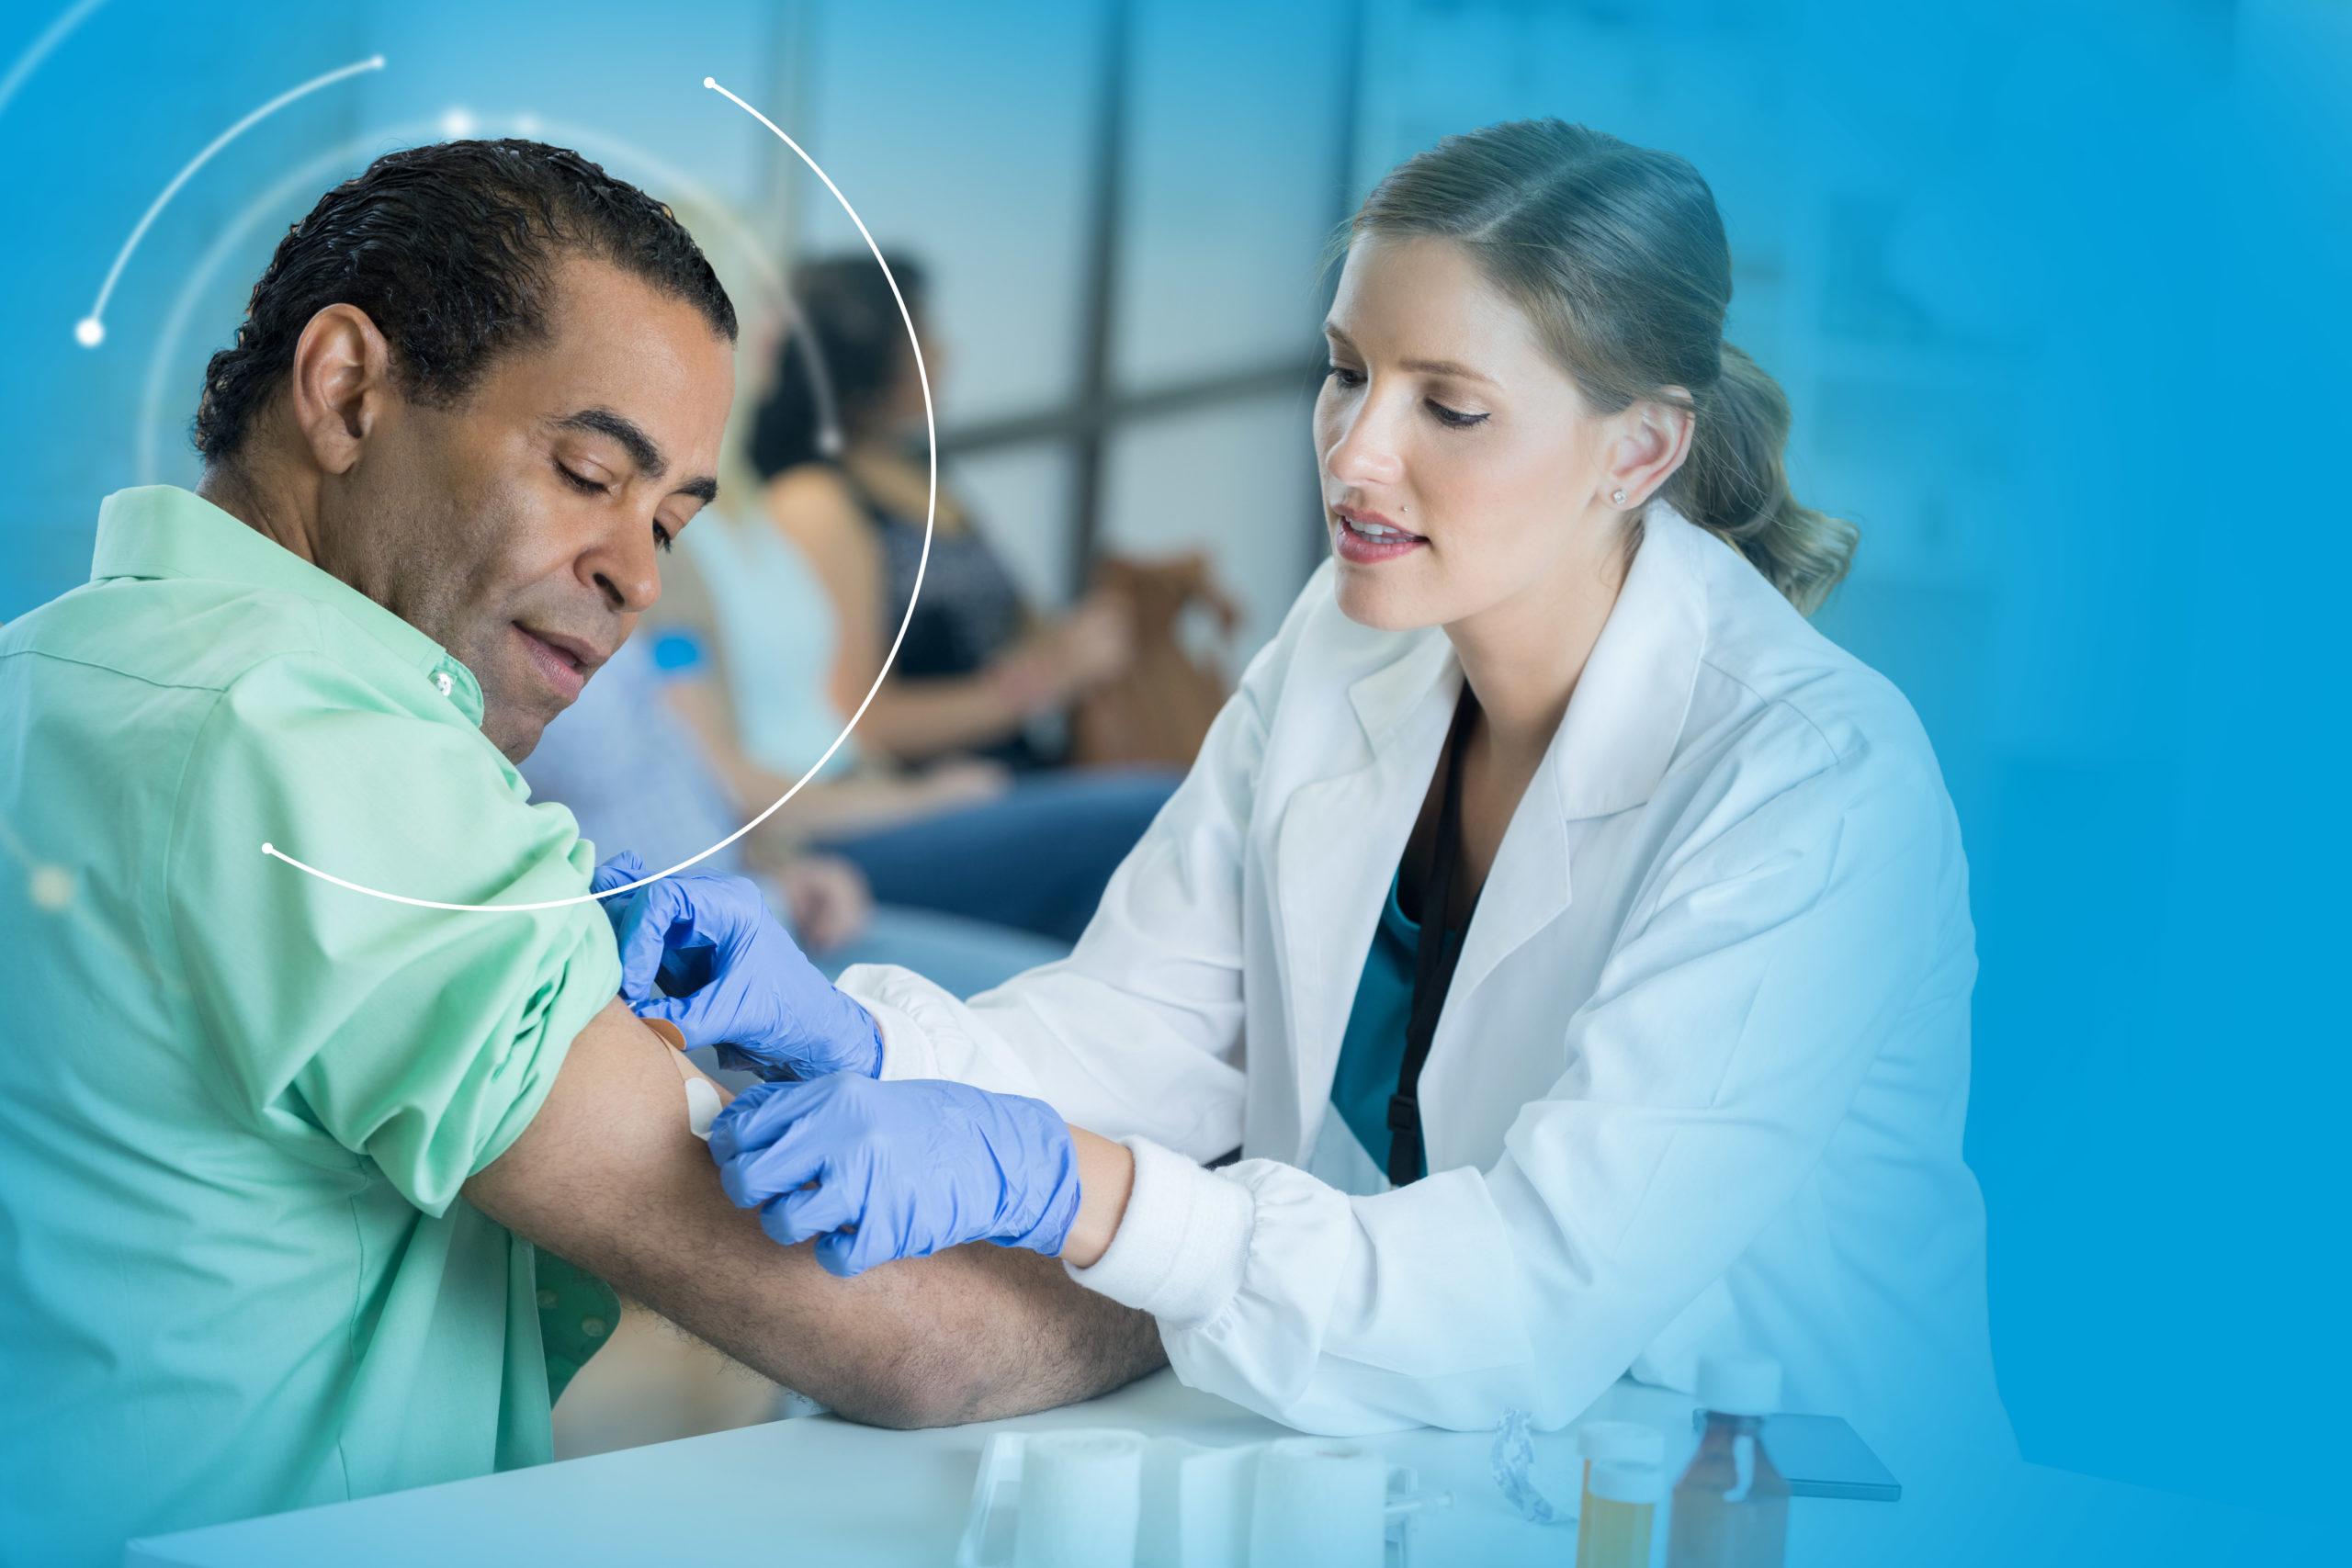 Flu Season is Quickly Approaching: How to Address Changes in Patient Engagement and Motivate Vaccination Fulfillment